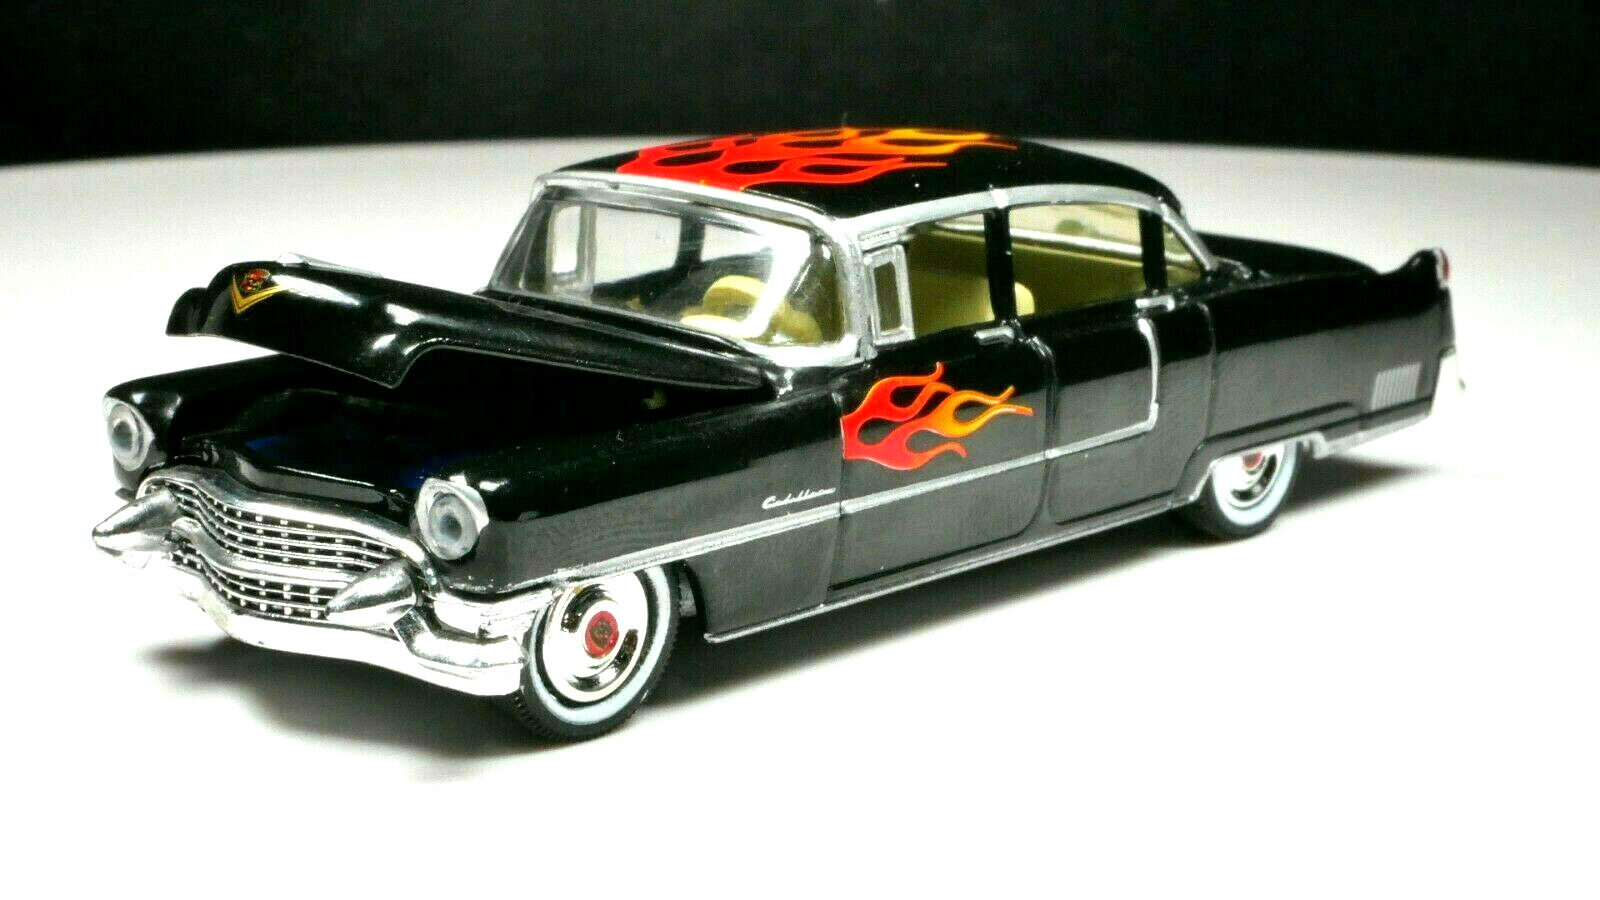 1955 Cadillac Fleetwood 60 Special  1:64 SCALE  DIECAST COLLECTOR  MODEL CAR